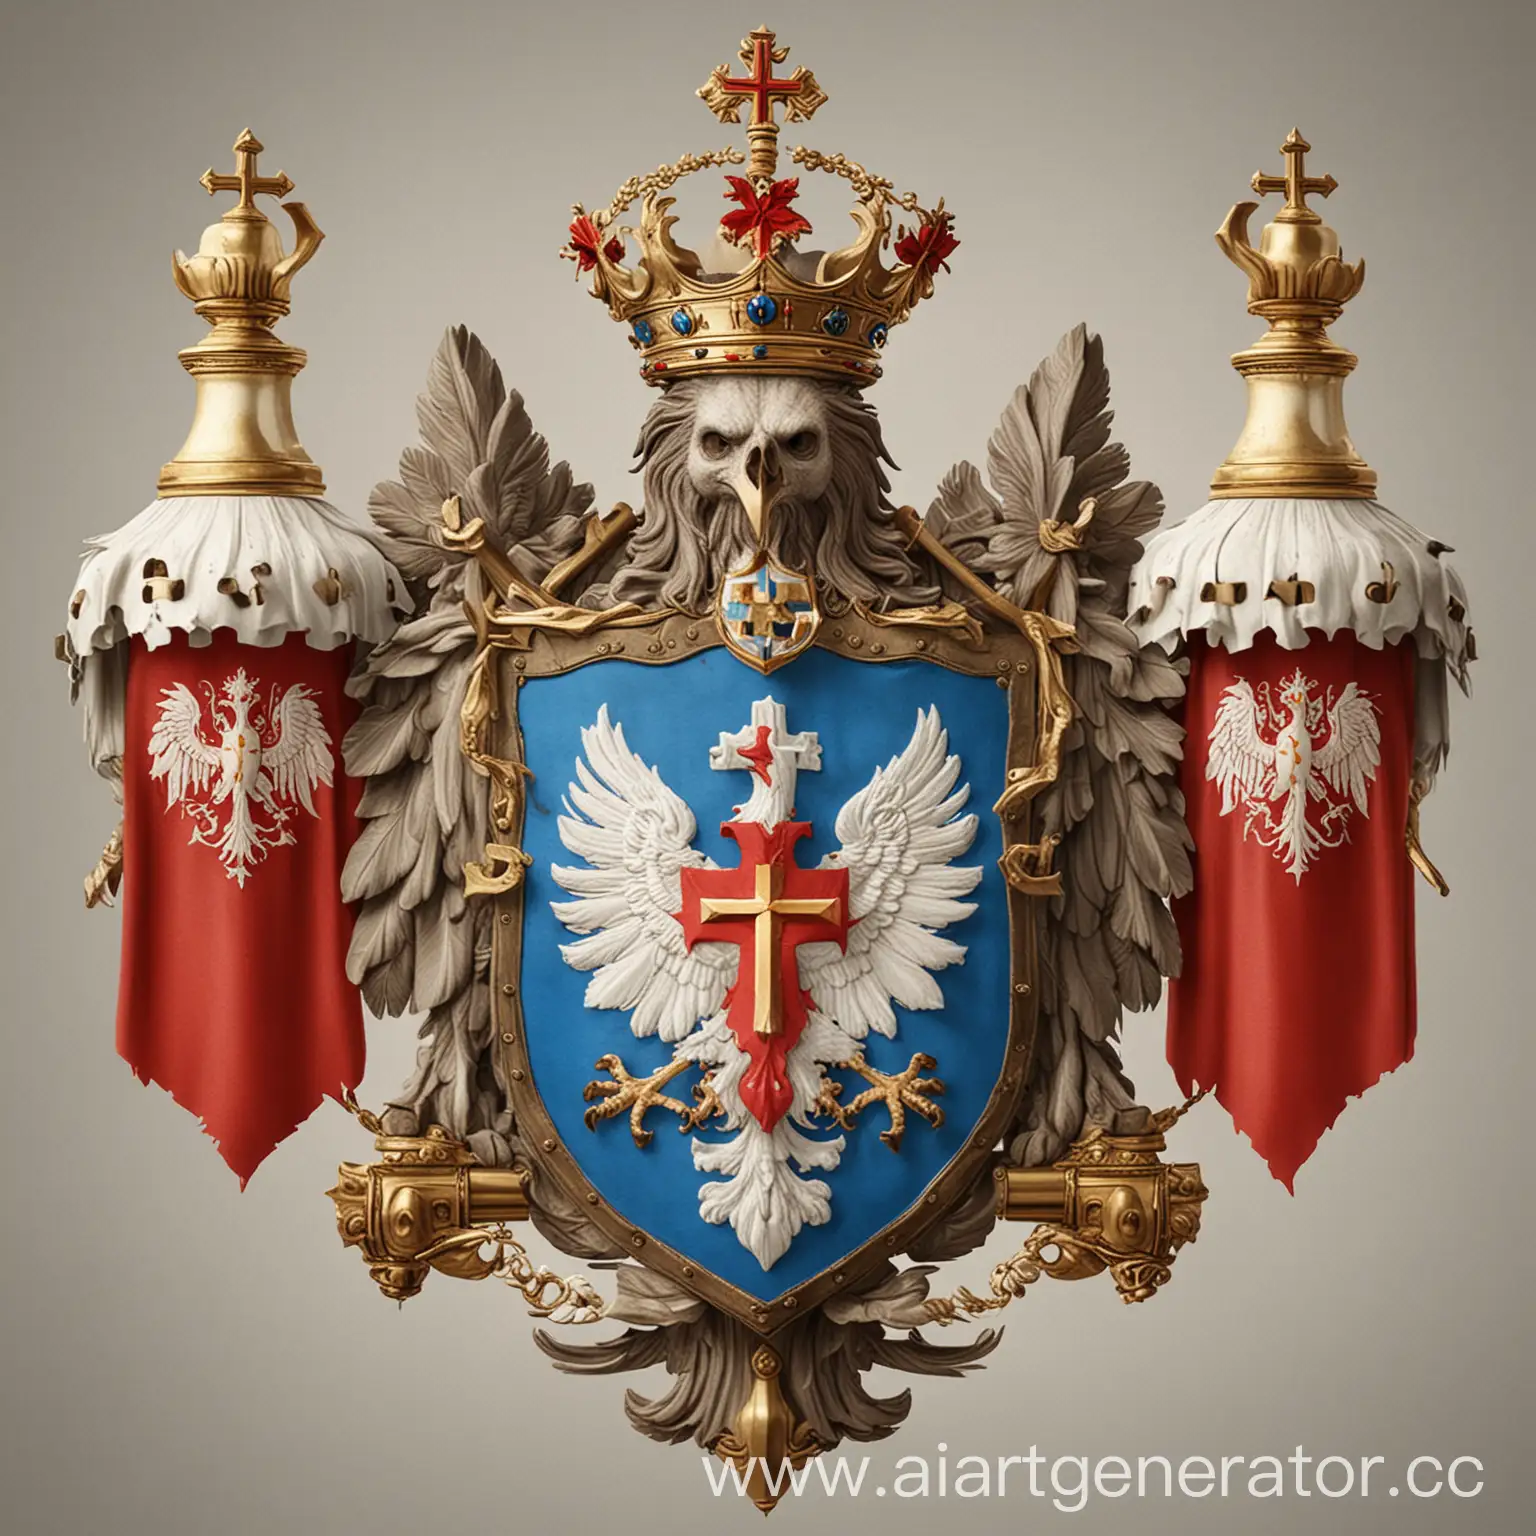 Coat-of-Arms-with-Tricolor-Flag-Jesus-Christ-Scepter-Lamps-and-TwoHeaded-Eagle